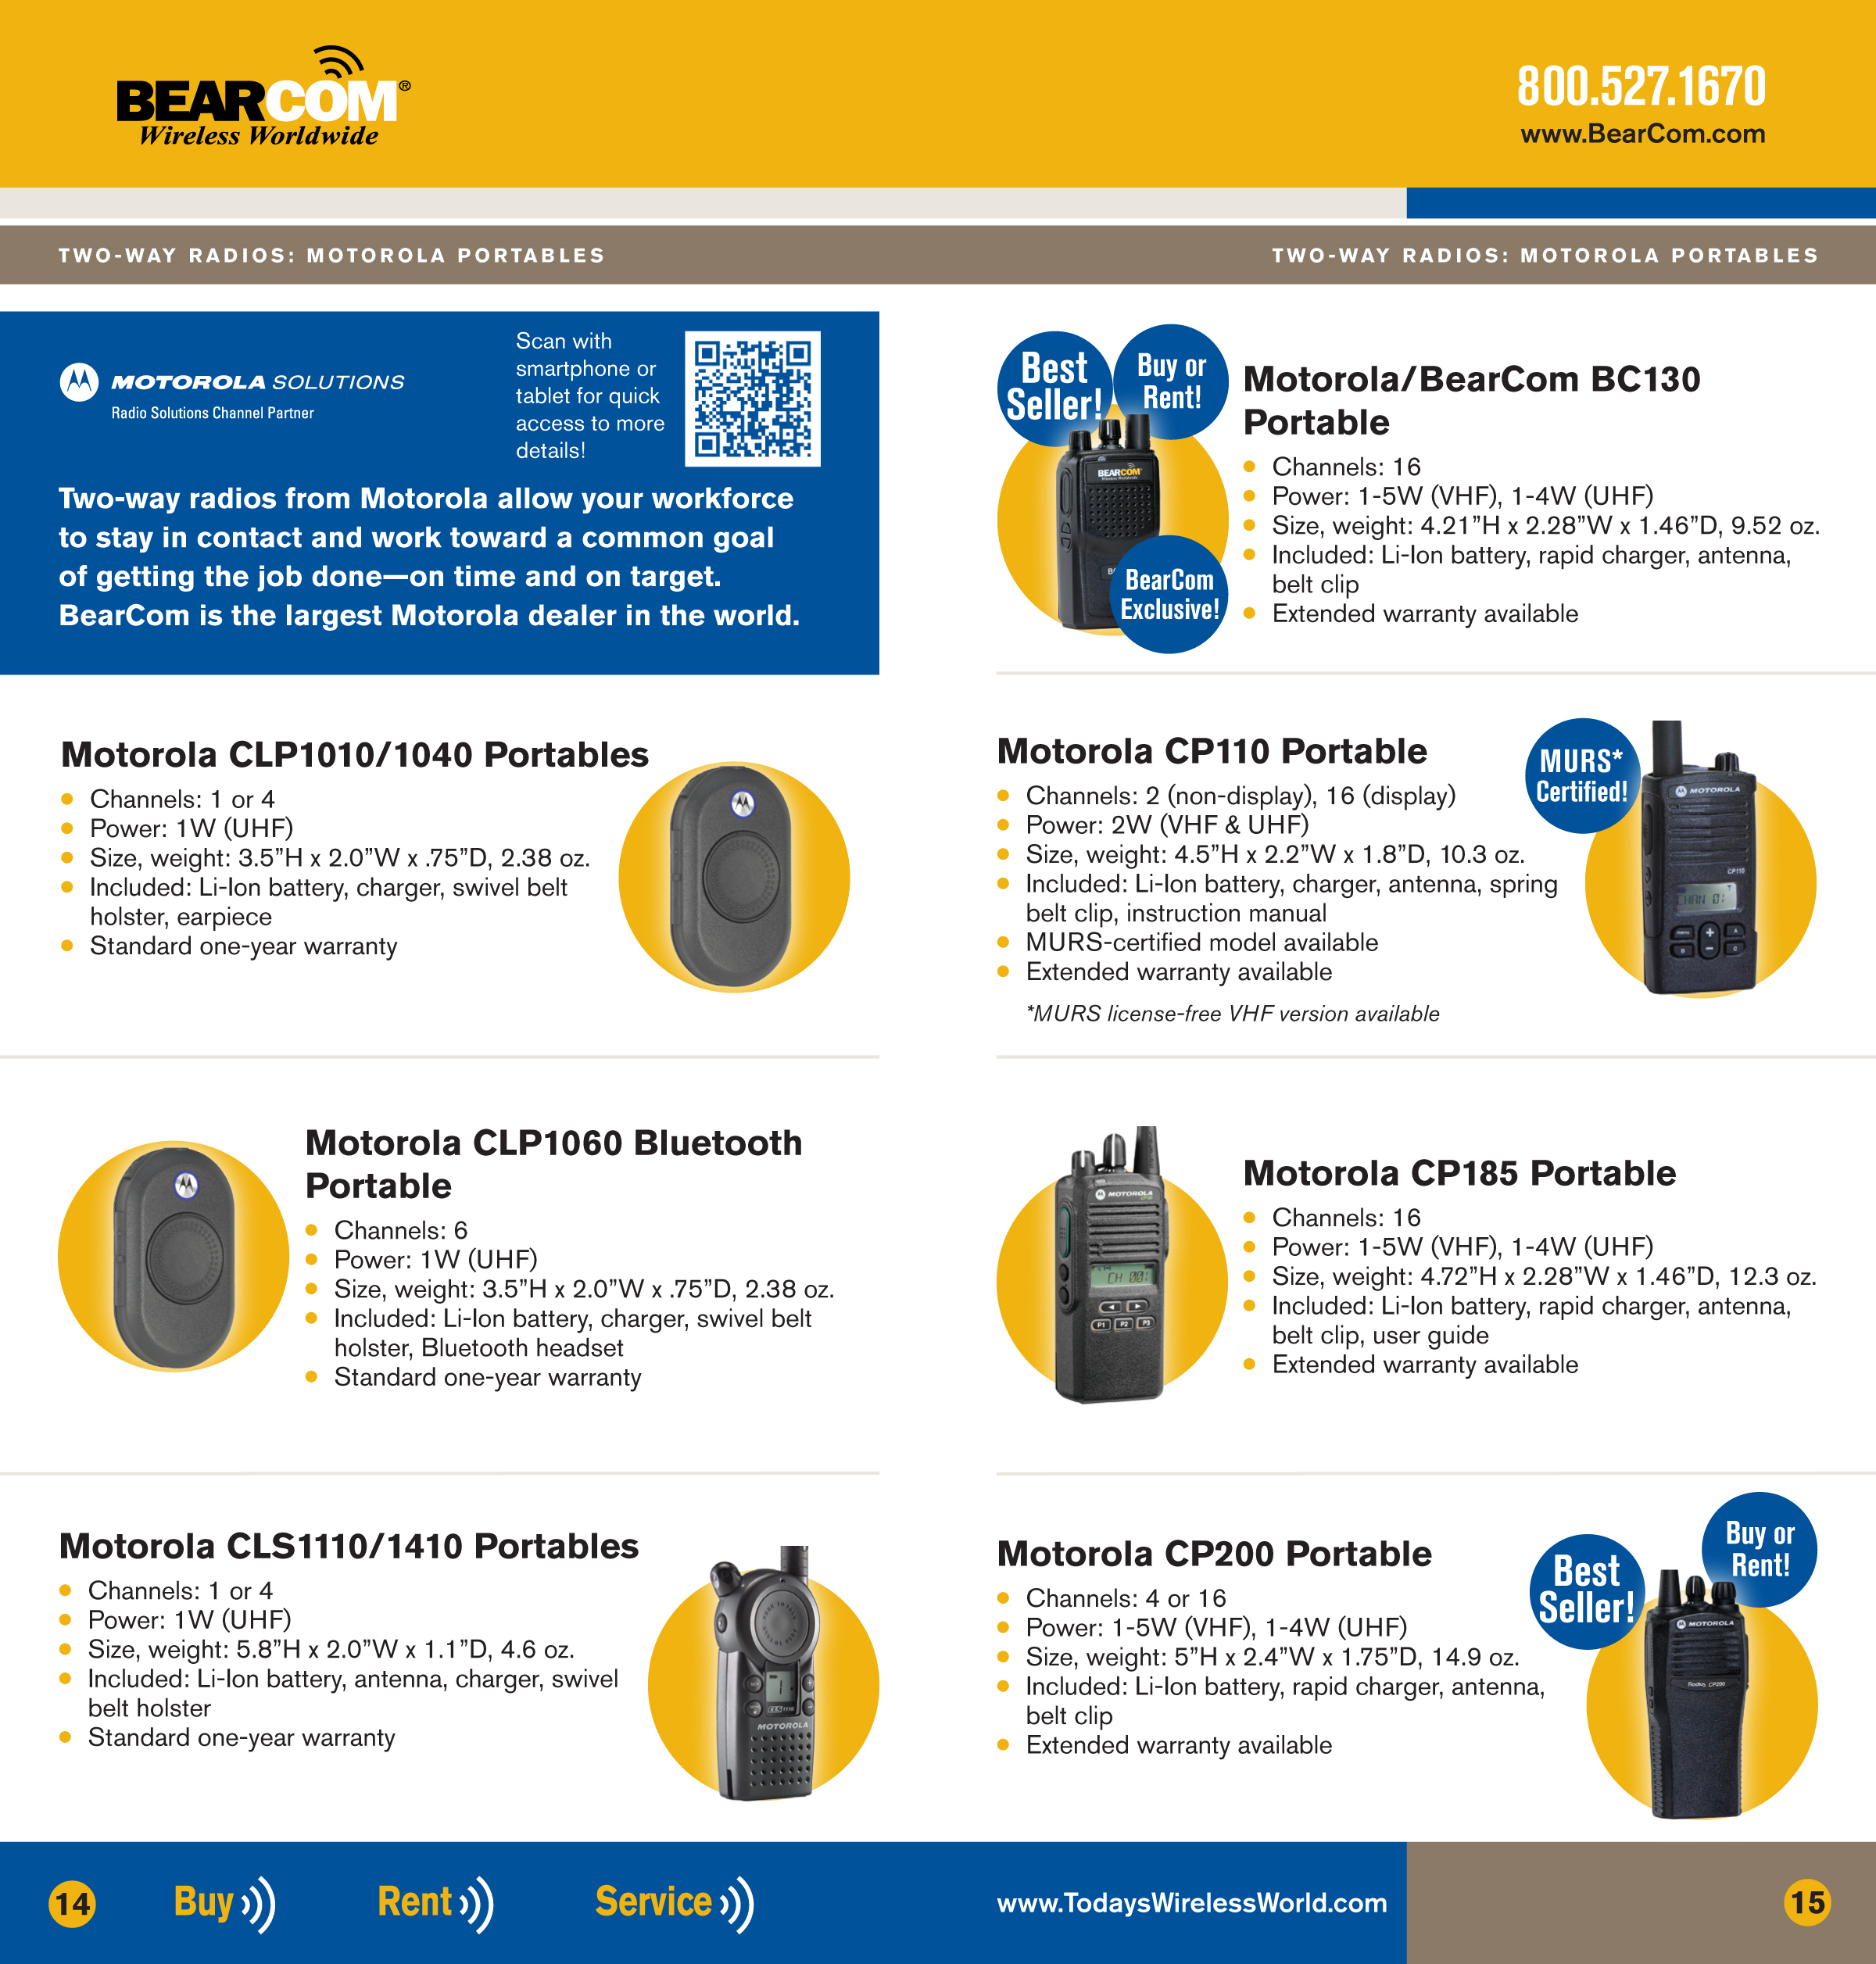 The BearCom Wireless Products, Services & Solutions Guide includes an update on the latest developments in digital two-way radios.